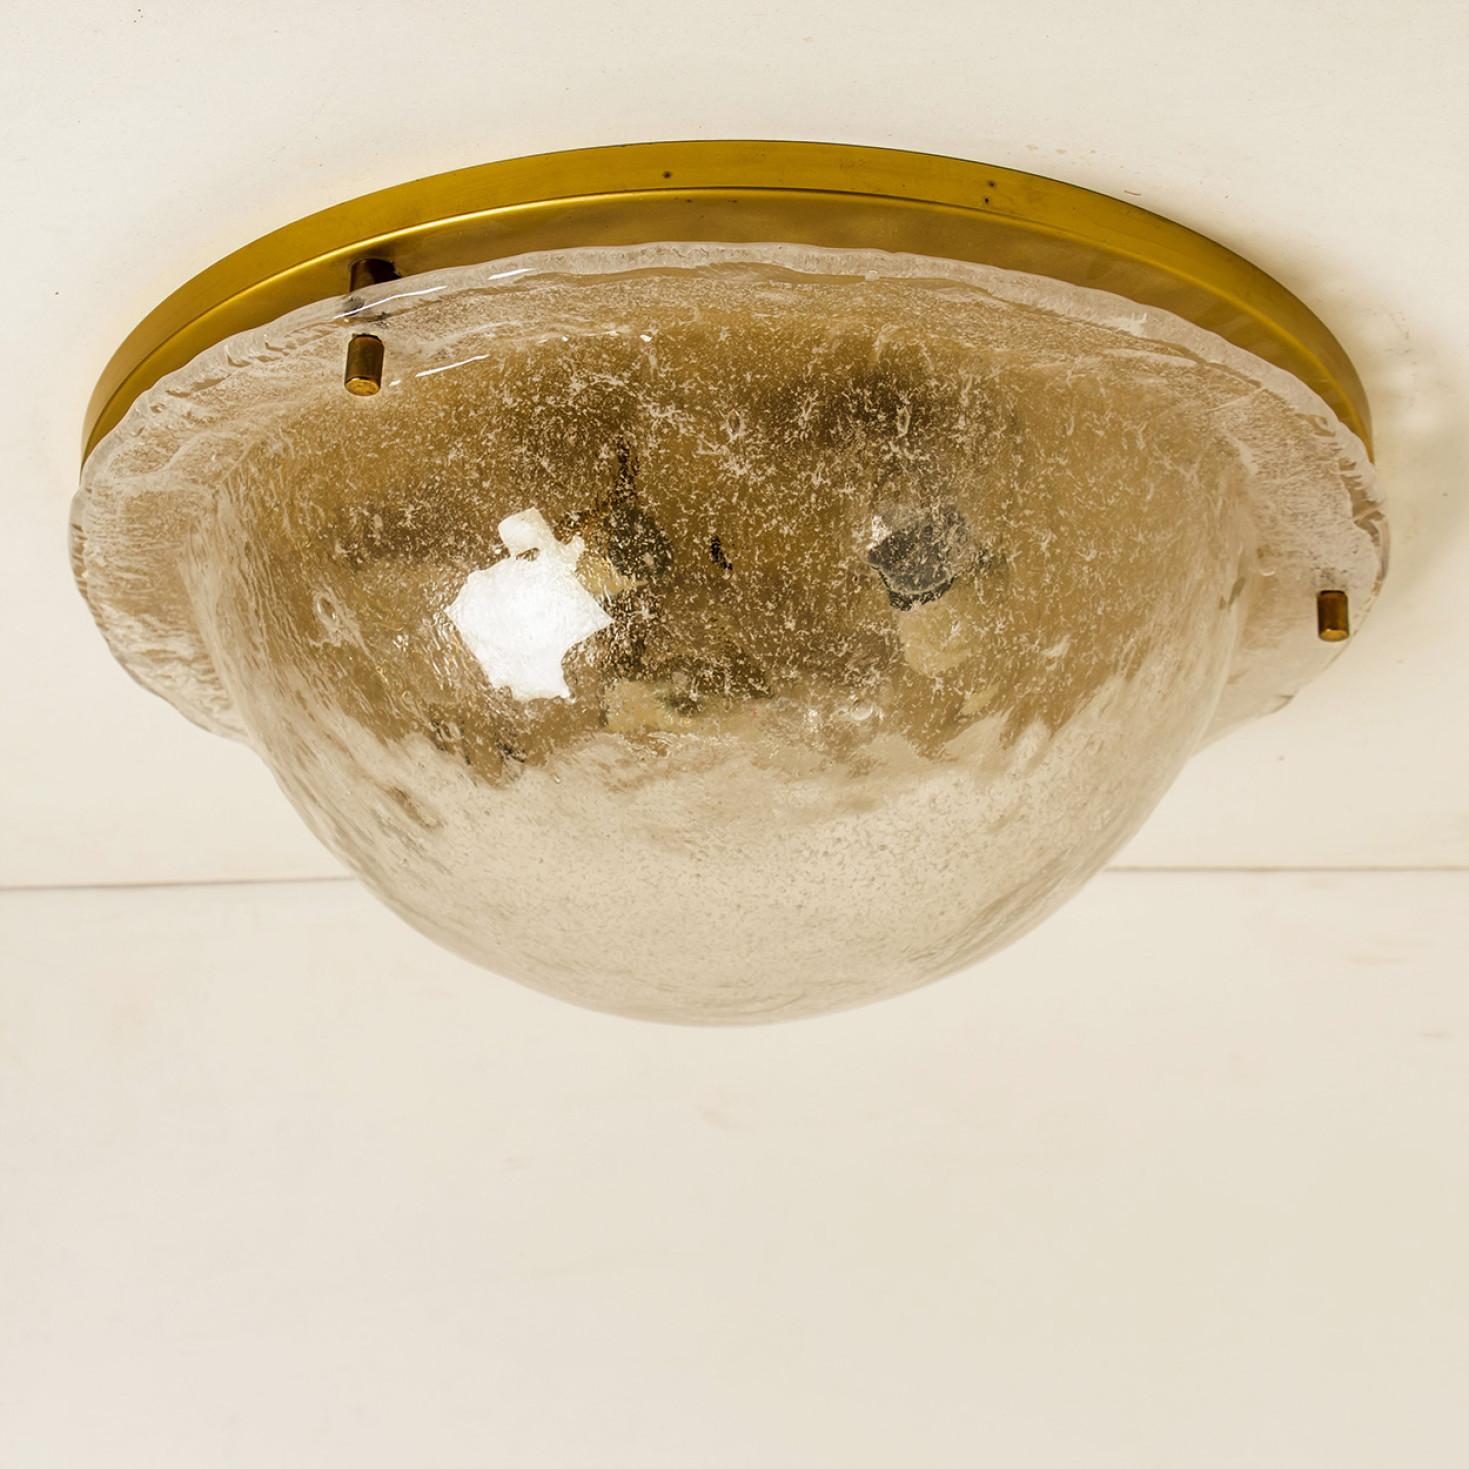 Original large glass flush mounts or wall sconces by Cosack Lights, Germany, 1970s
Wall light or Flush mount with four glass lighting elements. This light was designed and produced by Cosack Lights, one of the premium light producer is the 1960s and